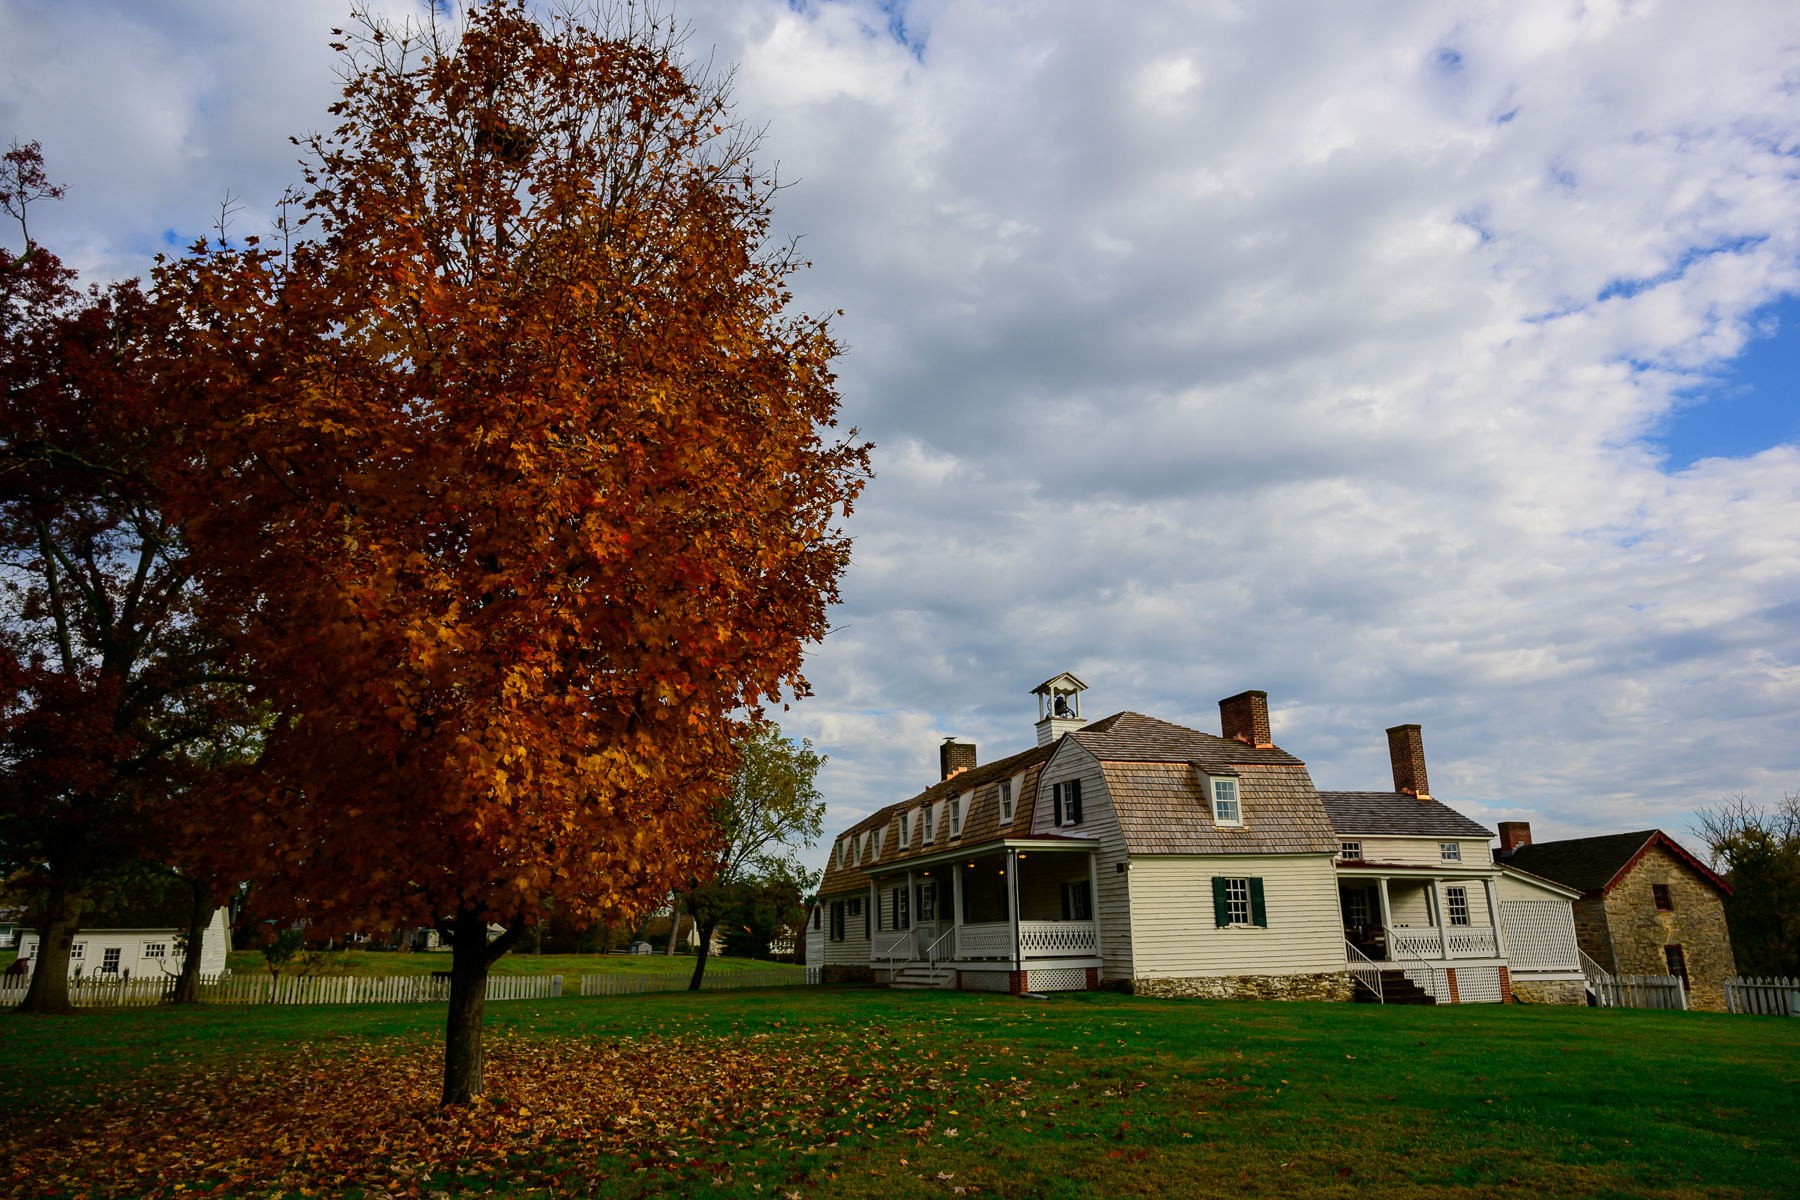 White building with shingle roof among fall colored trees.